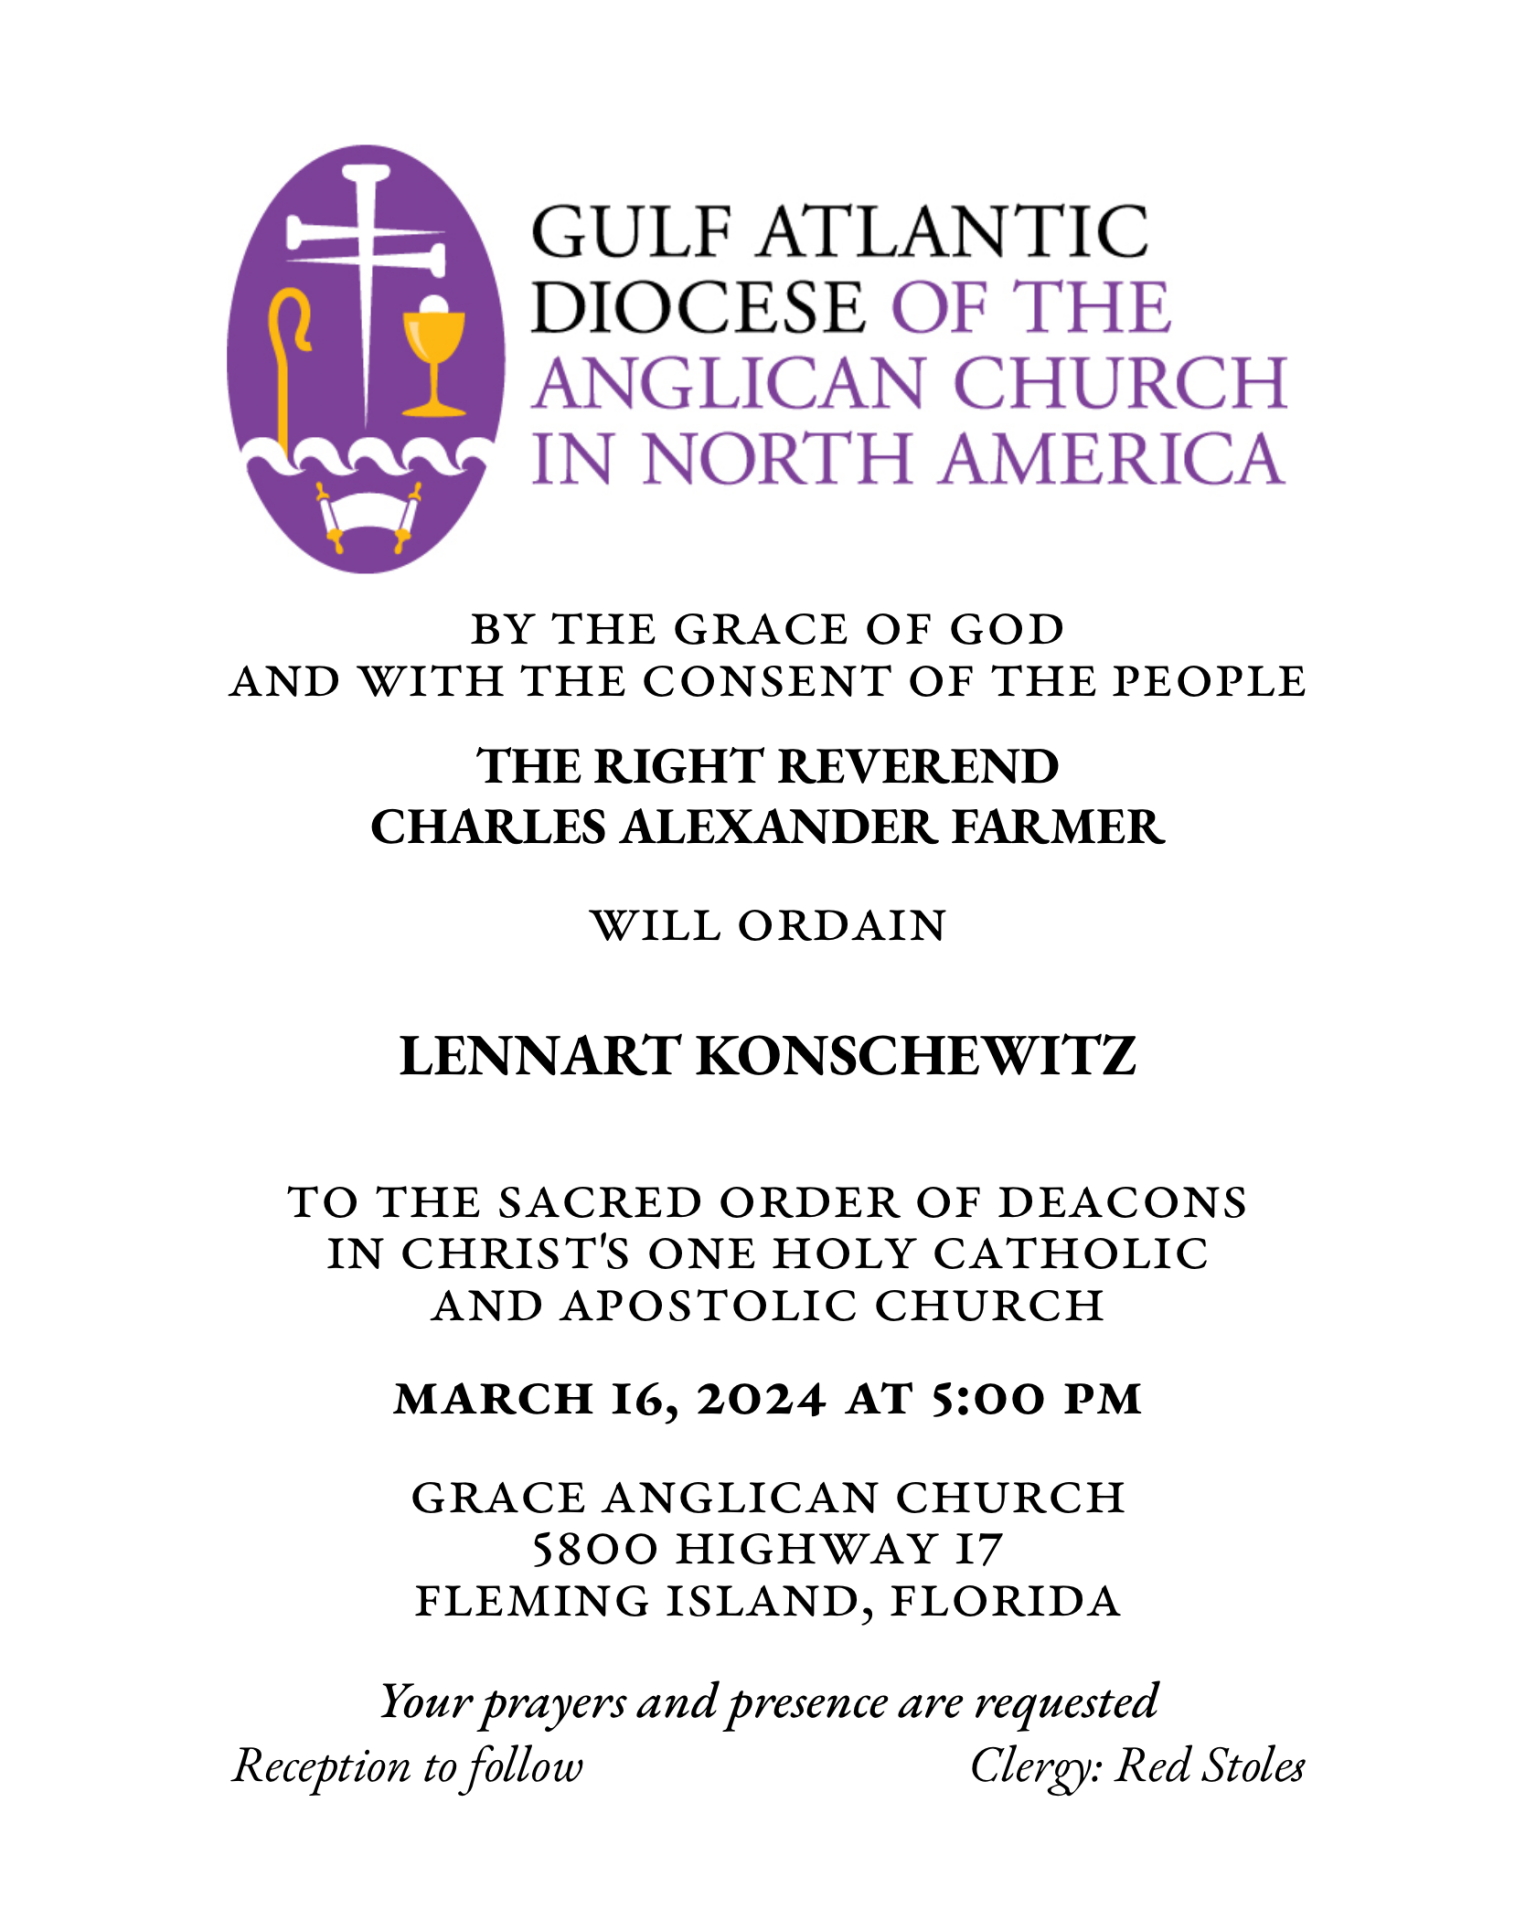 BY THE GRACE OF GOD AND WITH THE CONSENT OF THE PEOPLE, THE RIGHT REVEREND
CHARLES ALEXANDER FARMER
WILL ORDAIN
LENNART KONSCHEWITZ
TO THE SACRED ORDER OF DEACONS IN CHRIST'S ONE HOLY CATHOLIC
AND APOSTOLIC CHURCH
MARCH I6, 2024 AT 5:00 PM
GRACE ANGLICAN CHURCH
5800 HIGHWAY I7
FLEMING ISLAND, FLORIDA
Your prayers and presence are requested
Reception to follow
Clergy: Red Stoles